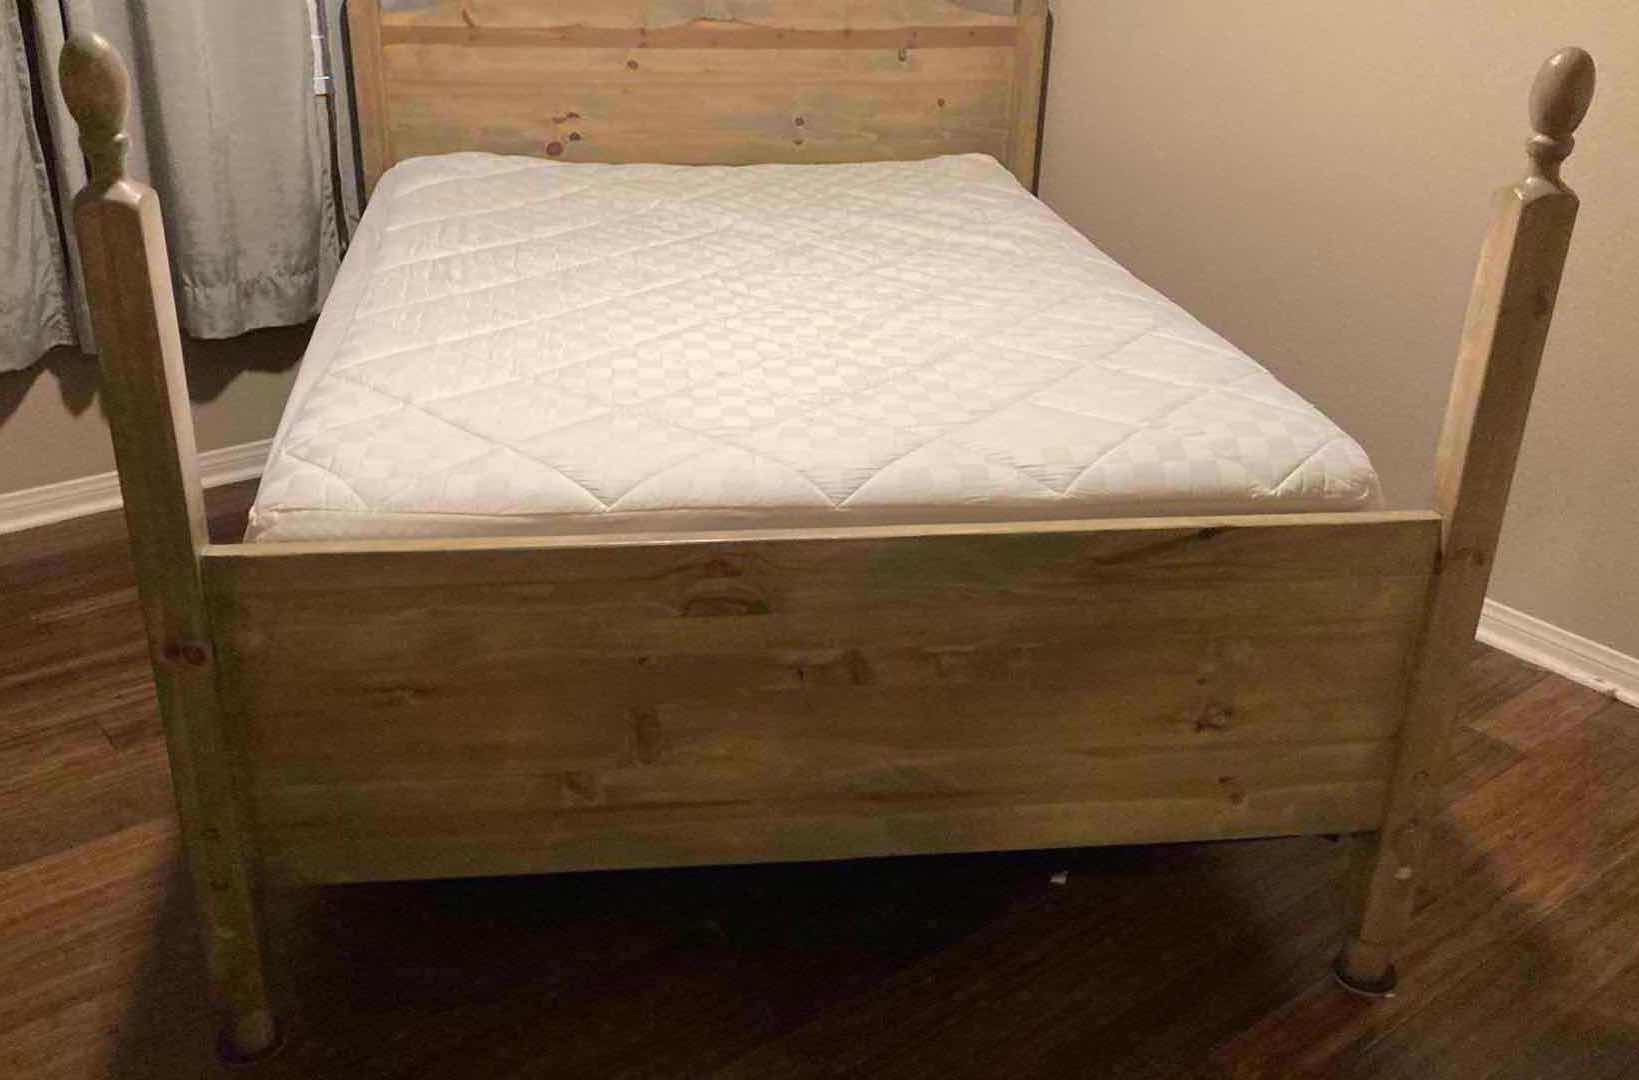 Photo 3 of PINE TWO TONE WOOD FULL SIZE BED FRAME W SEALY POSTURE-PEDIC HYBRID MATTRESS & BOX SPRING